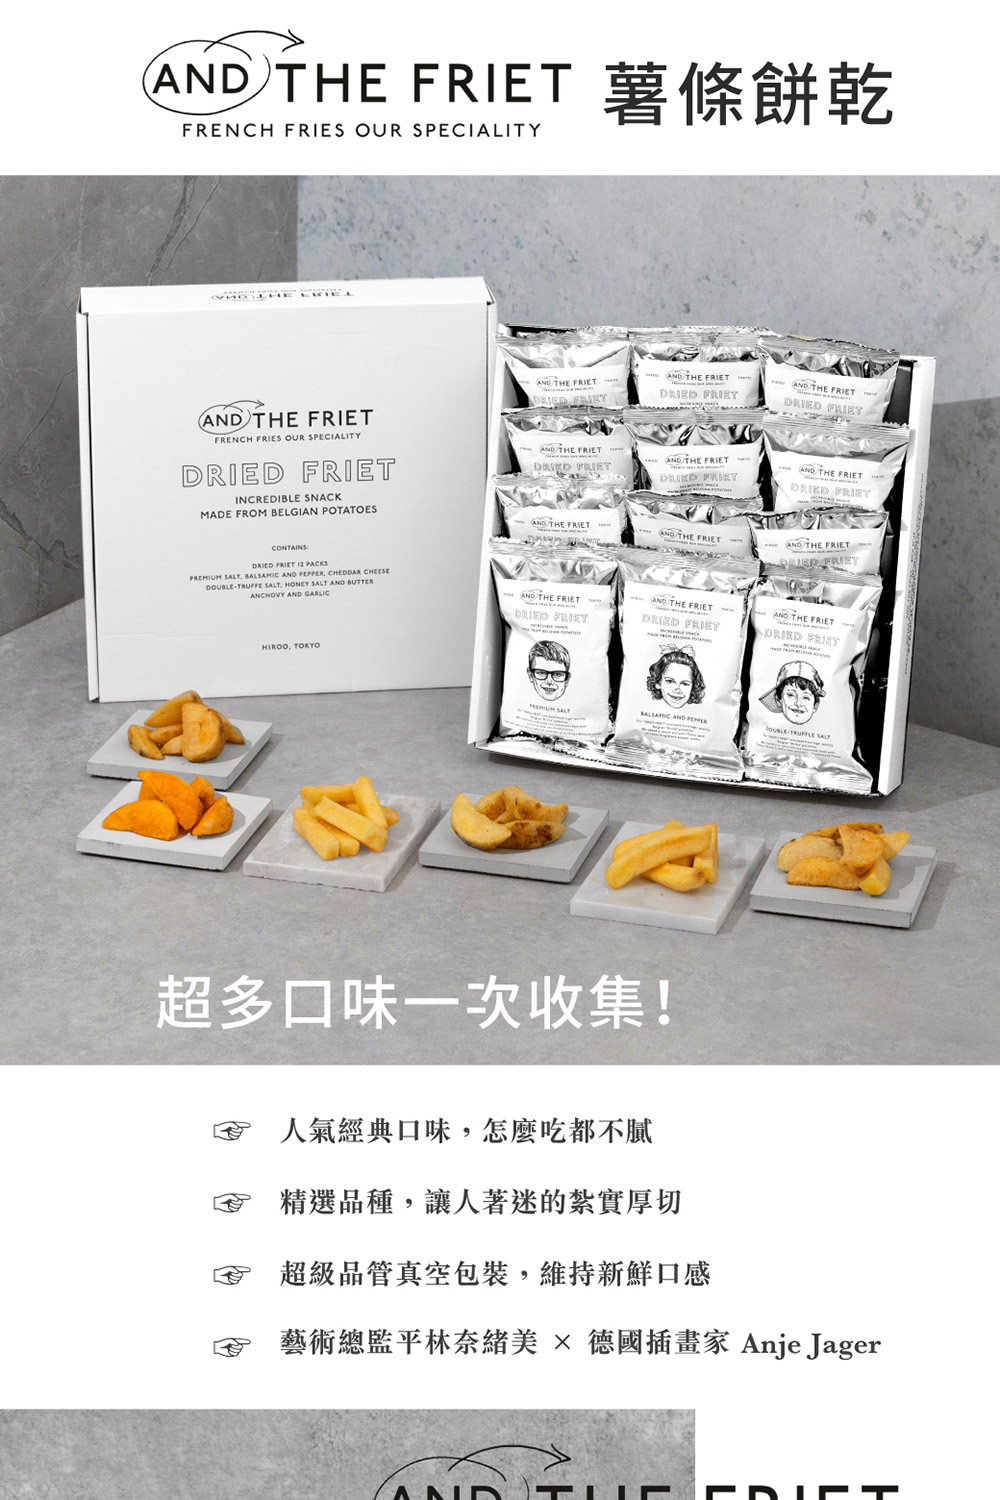 AND THE FRIET DRIED FRIET 乾薯條迷